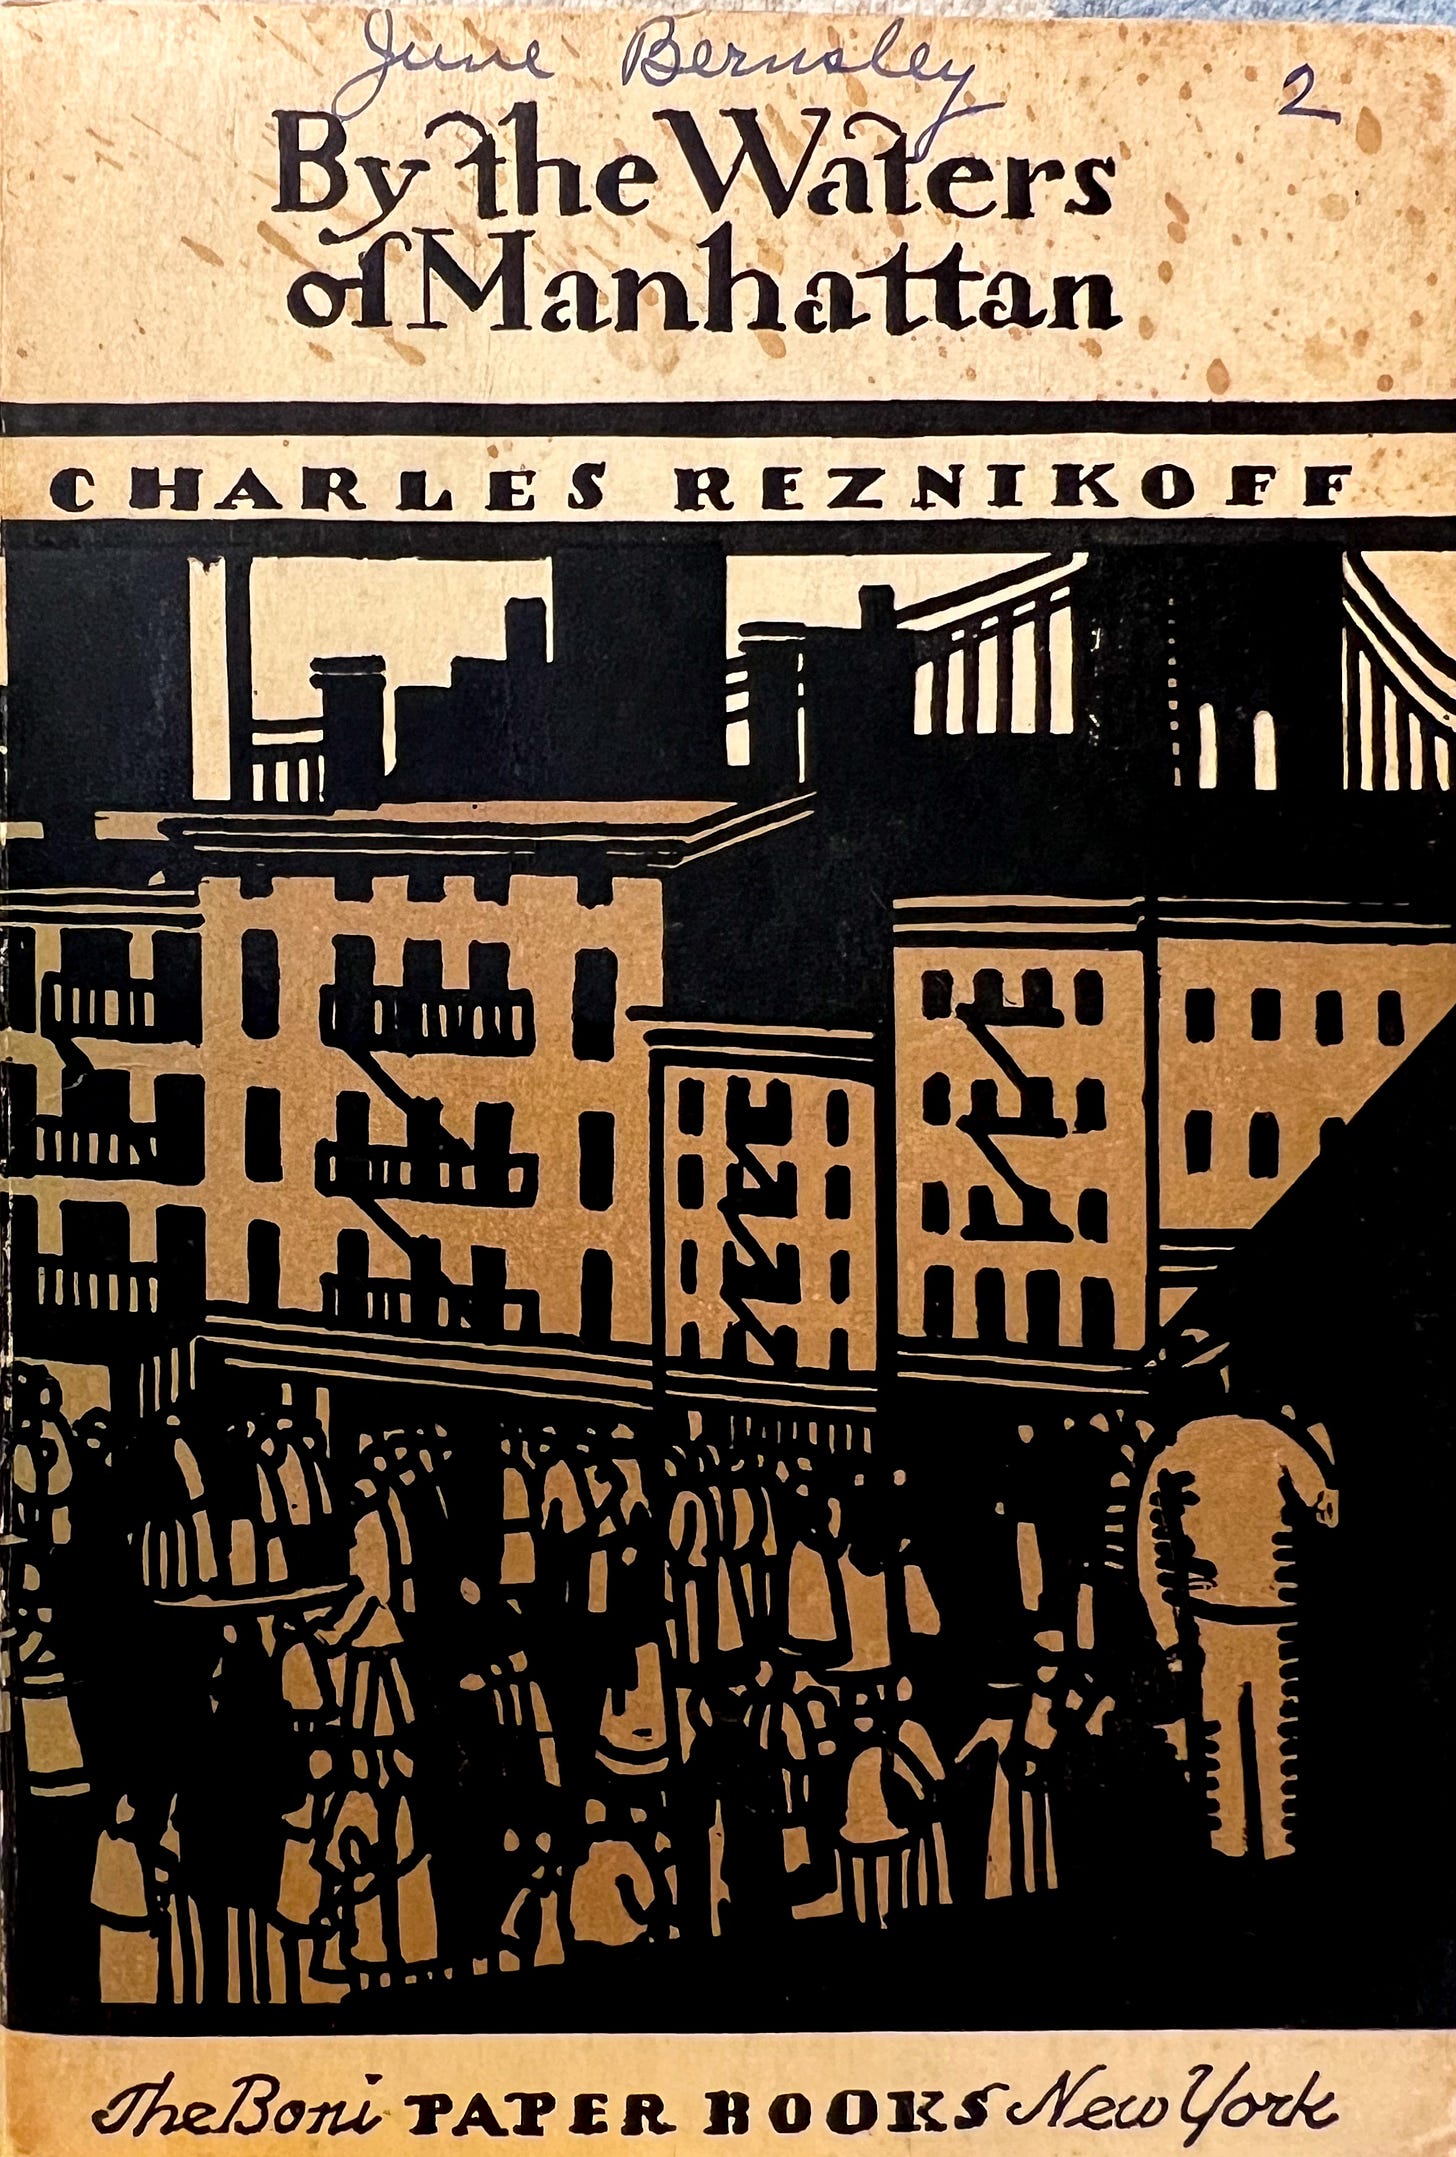 A book cover, with the title and author's name hand-lettered, and an illustration of New York's Lower East Side with the Brooklyn Bridge as a backdrop